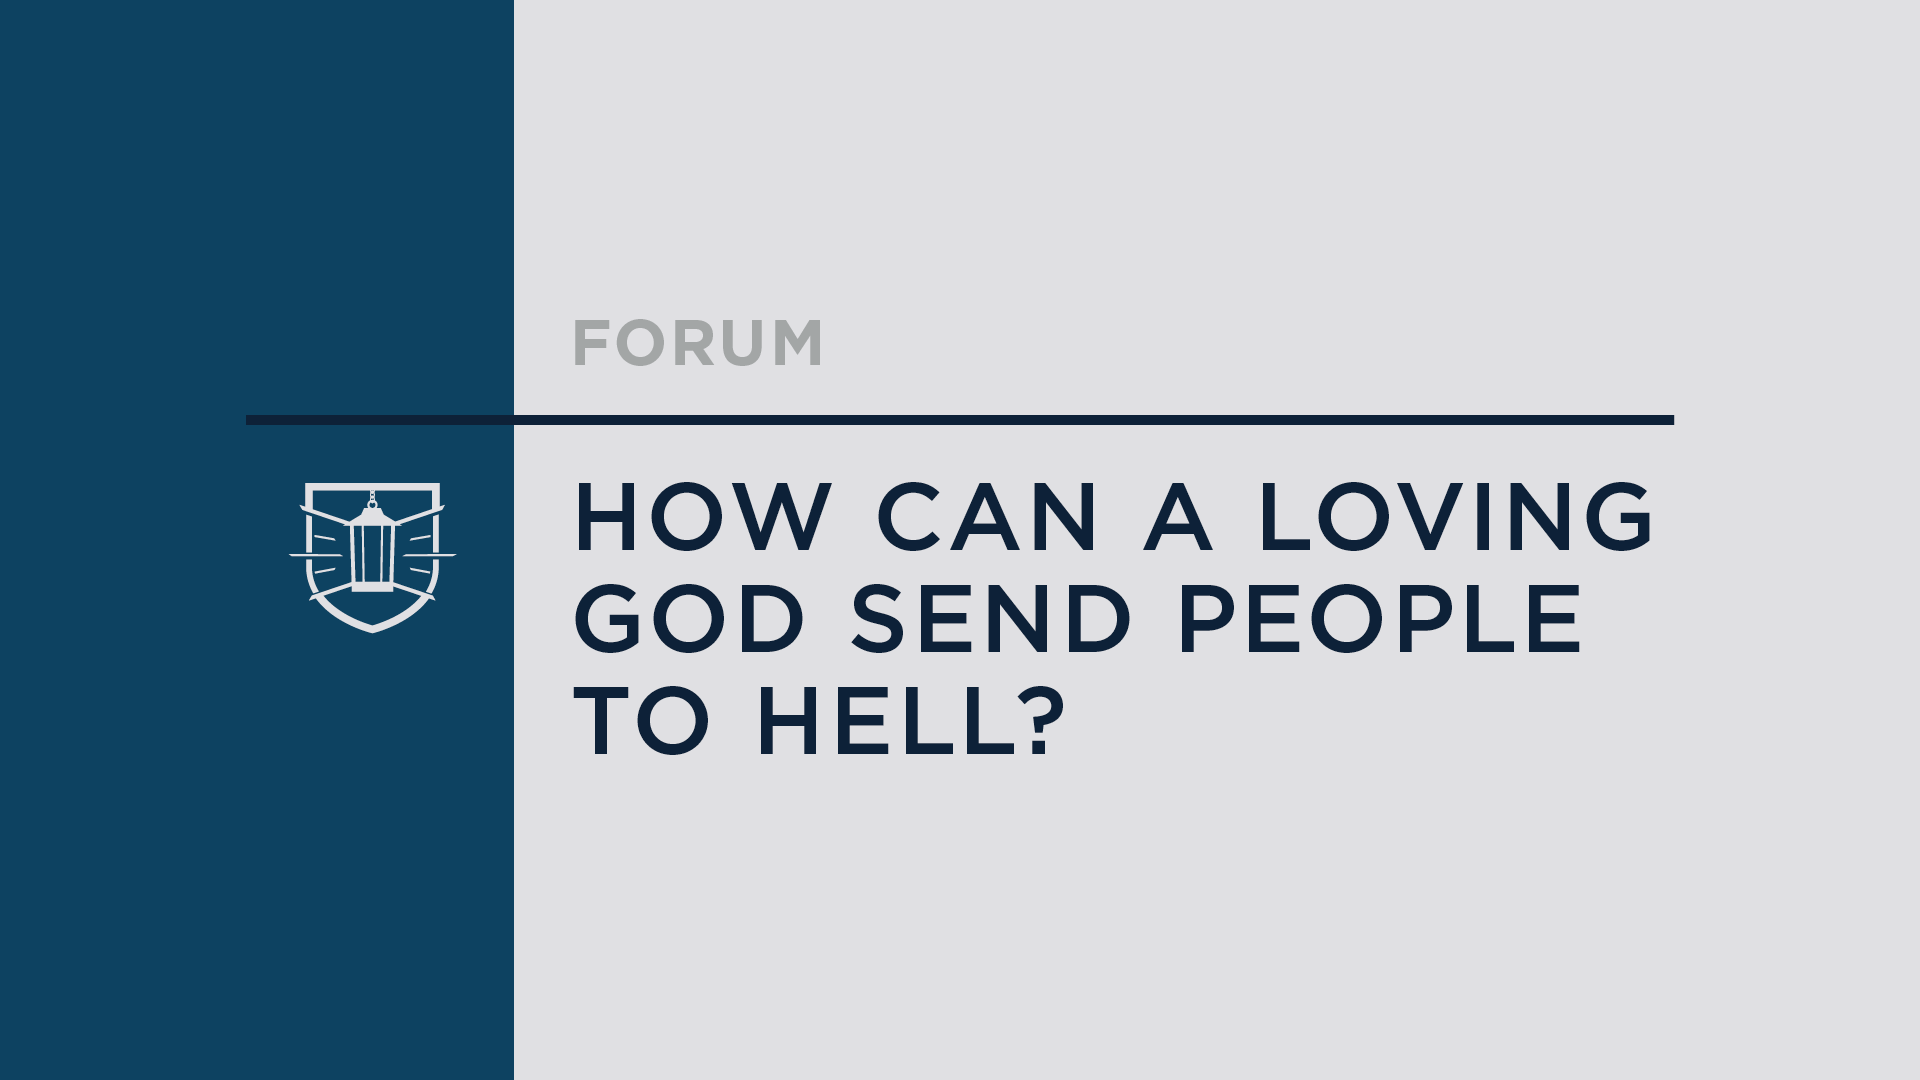 How Can a Loving God Send People to Hell?